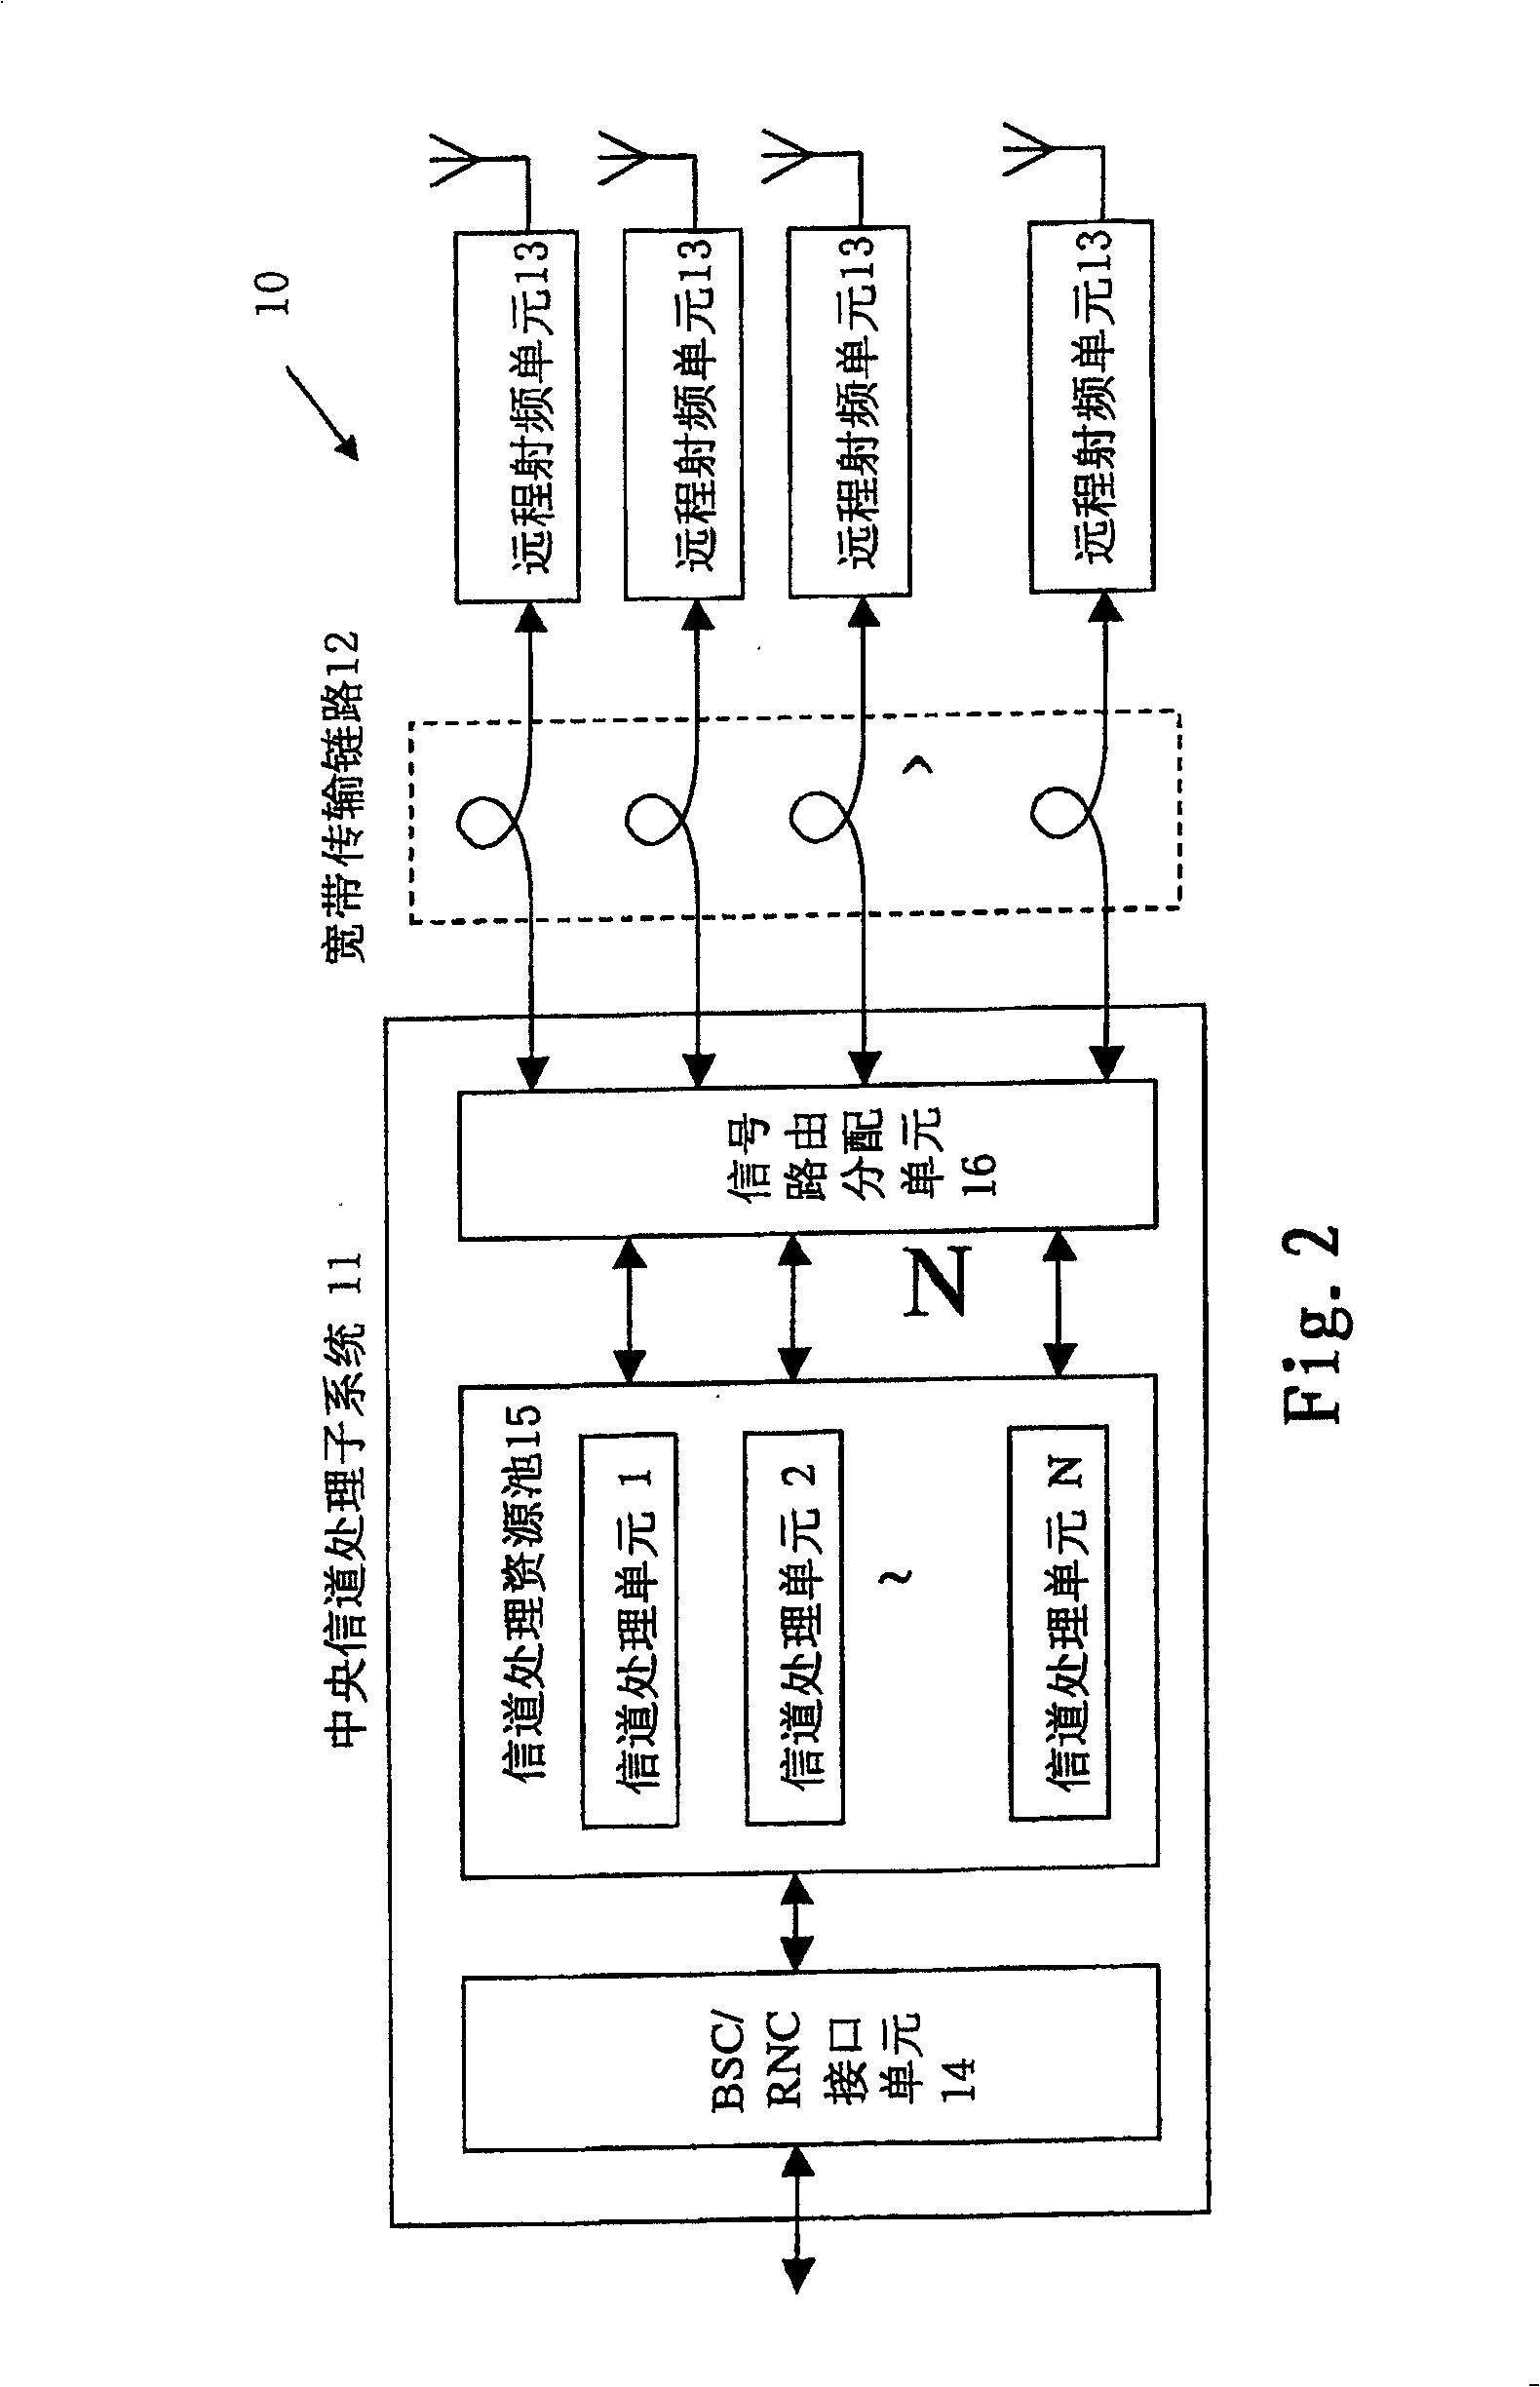 Central base station system based on advanced telecommunication computer system structure